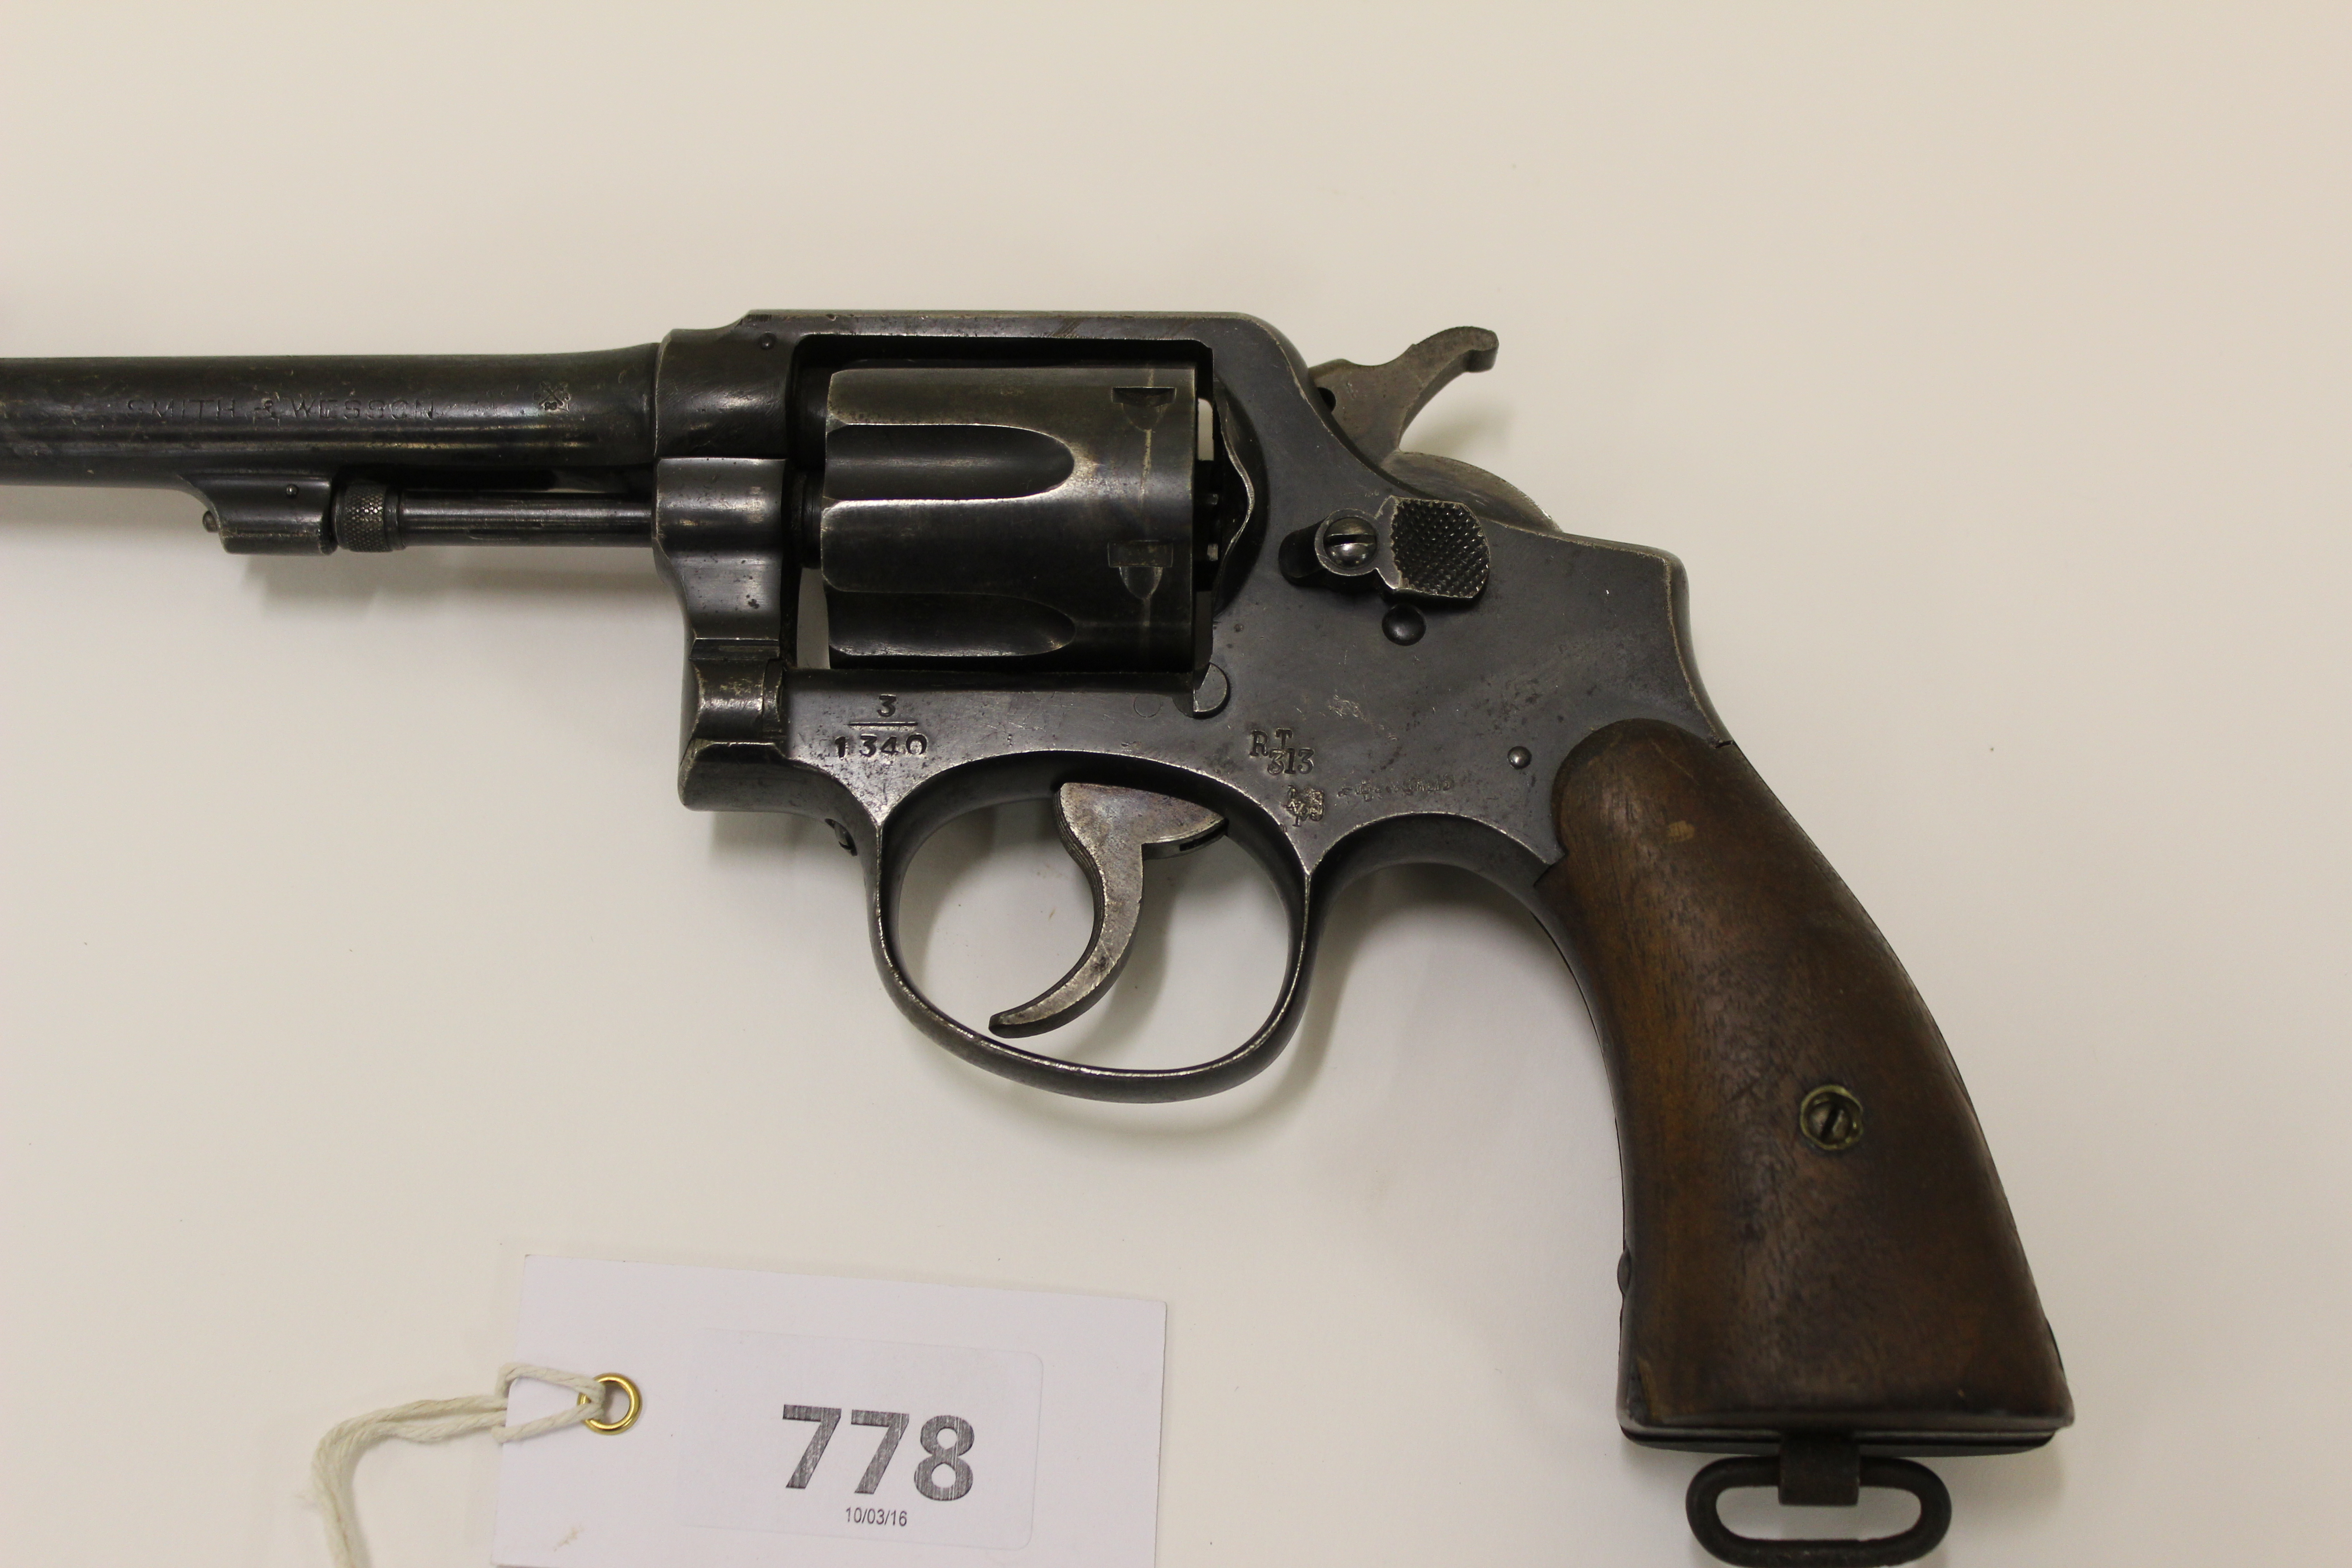 .38 Smith & Wesson, six shot revolver, 1914 patent, 5 ins barrel stamped Smith & Wesson, Springfield - Image 2 of 8